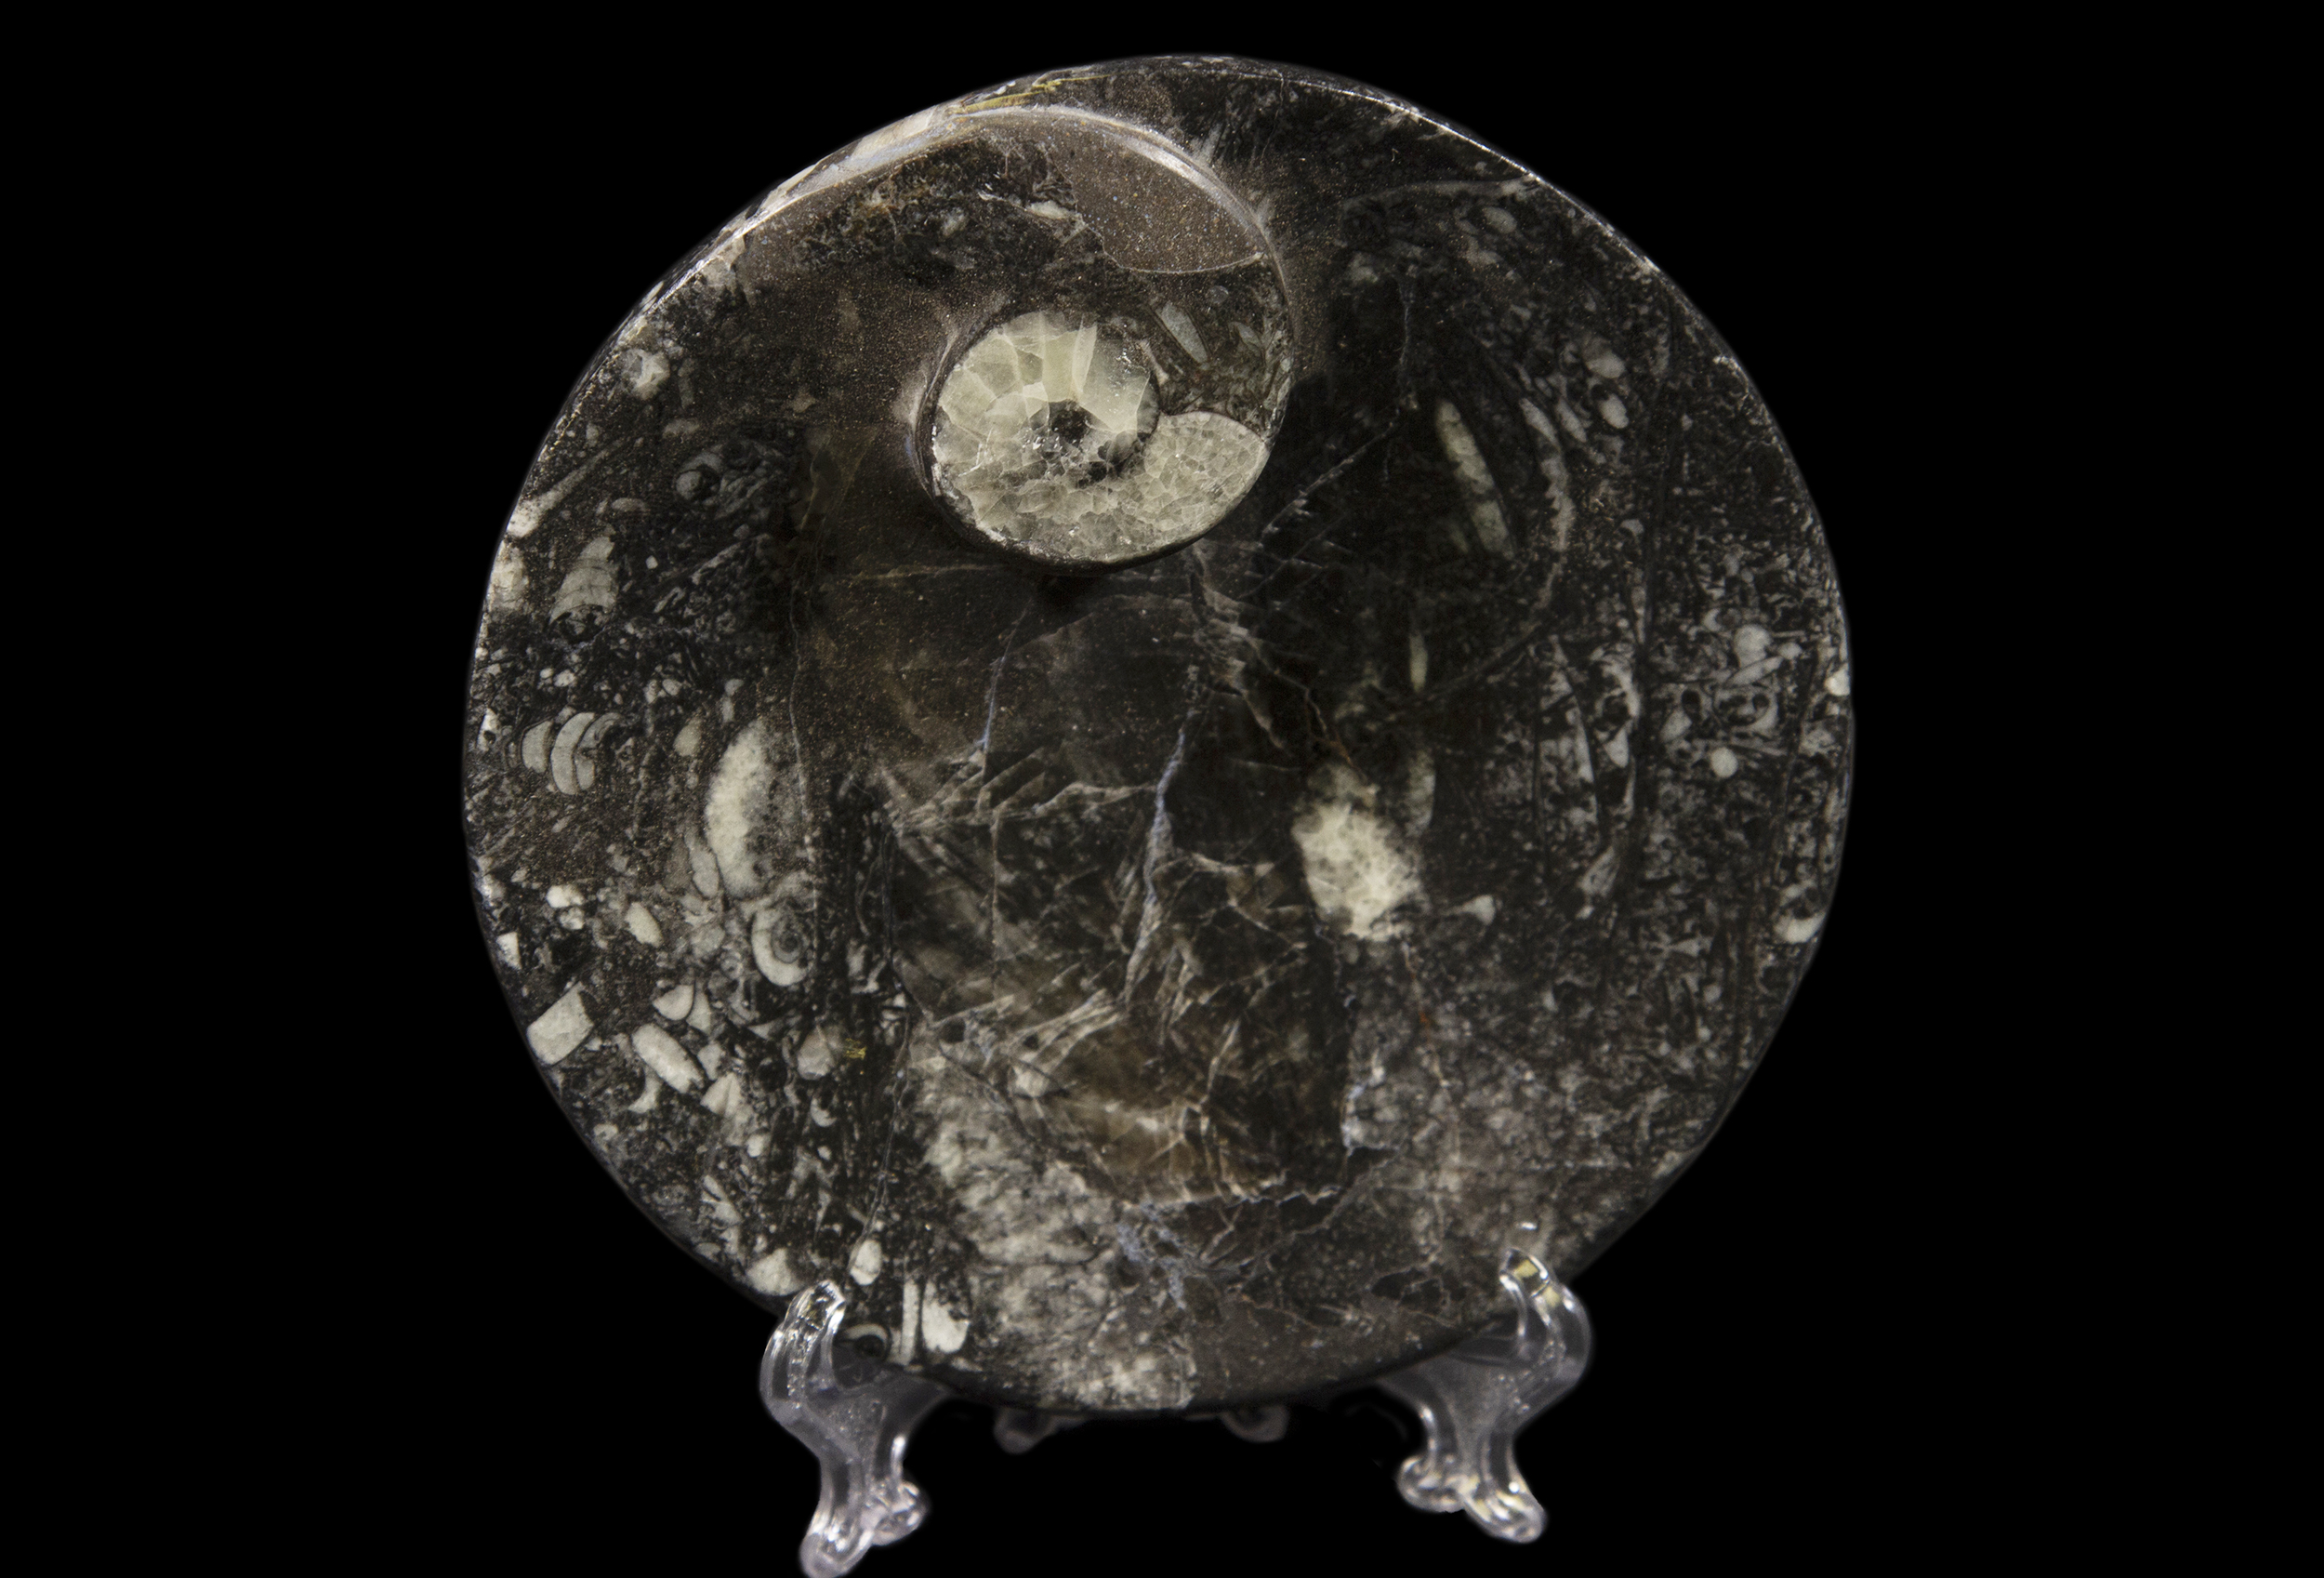 Black Ammonite and Orthoceras Round Tray on display stand